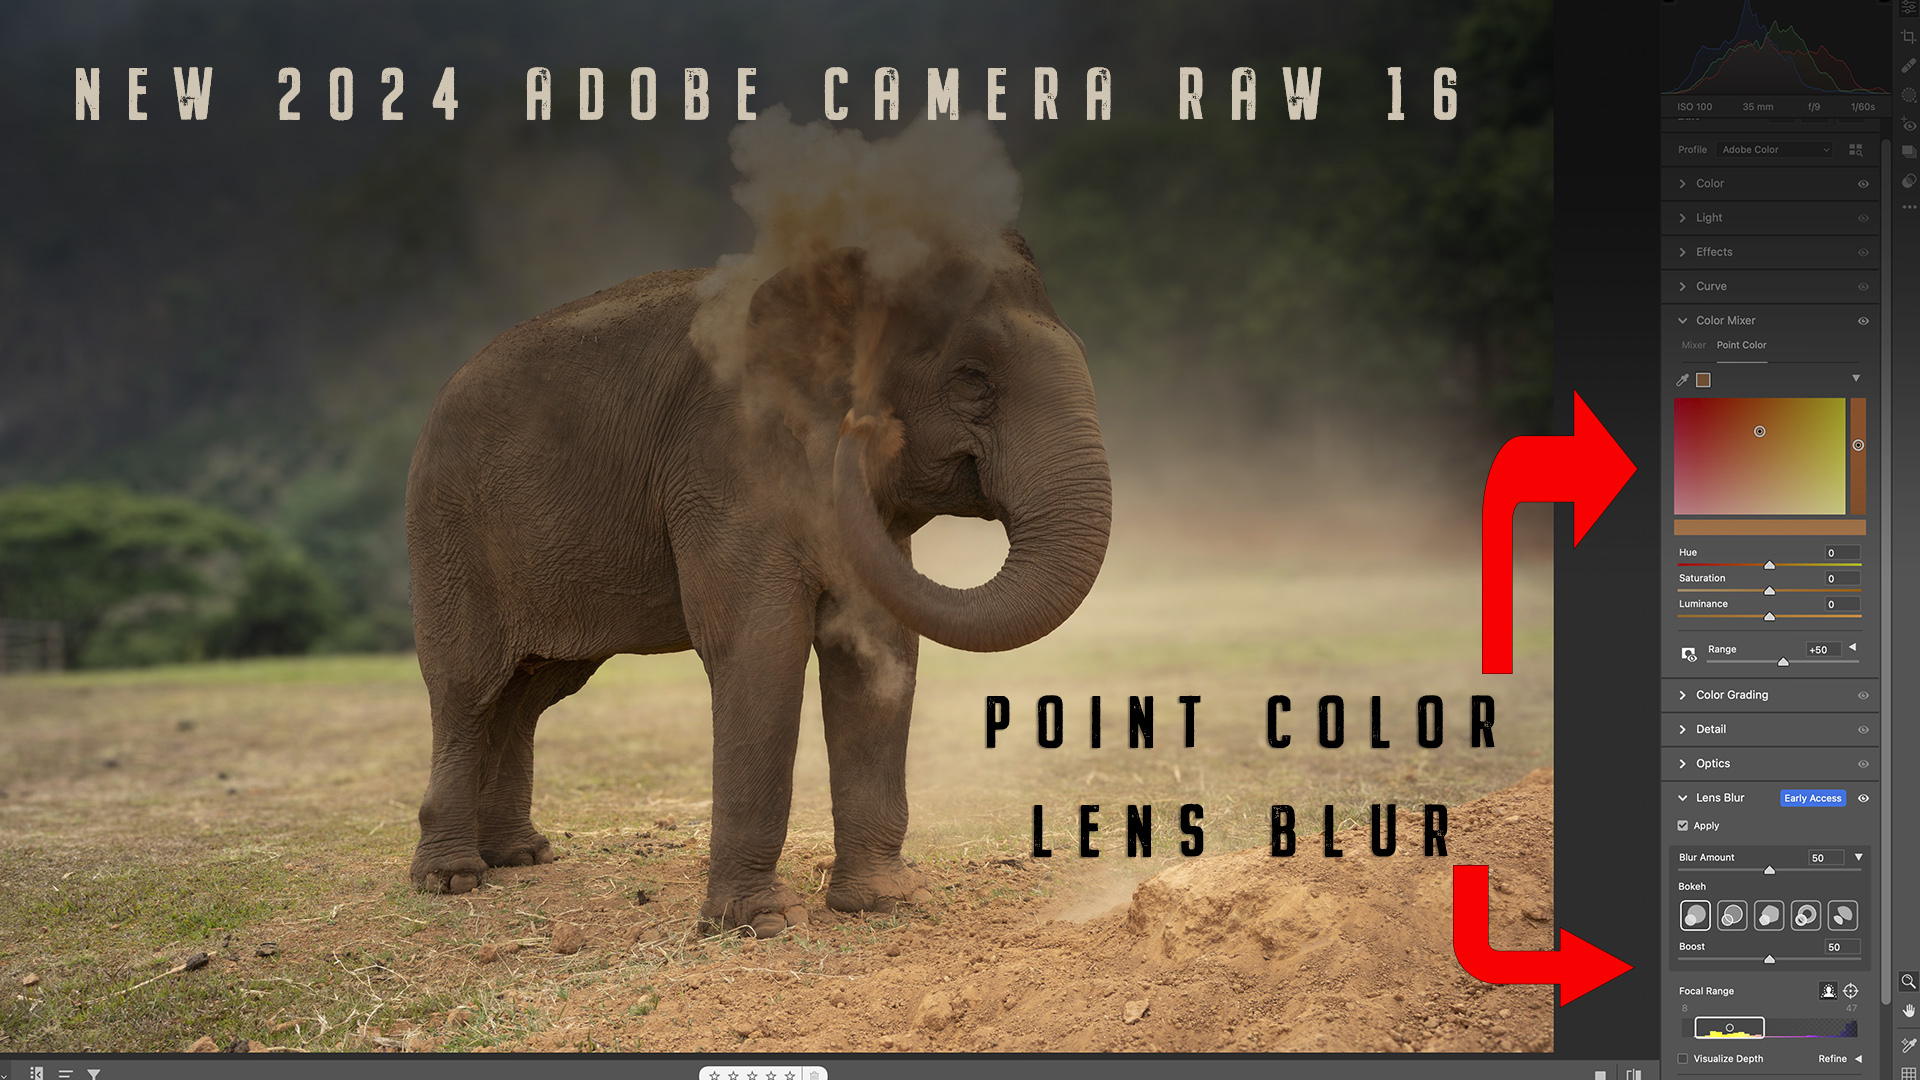 ADOBE CAMERA RAW 2023 – Version 16 LENS BLUR, POINT COLOR & MORE